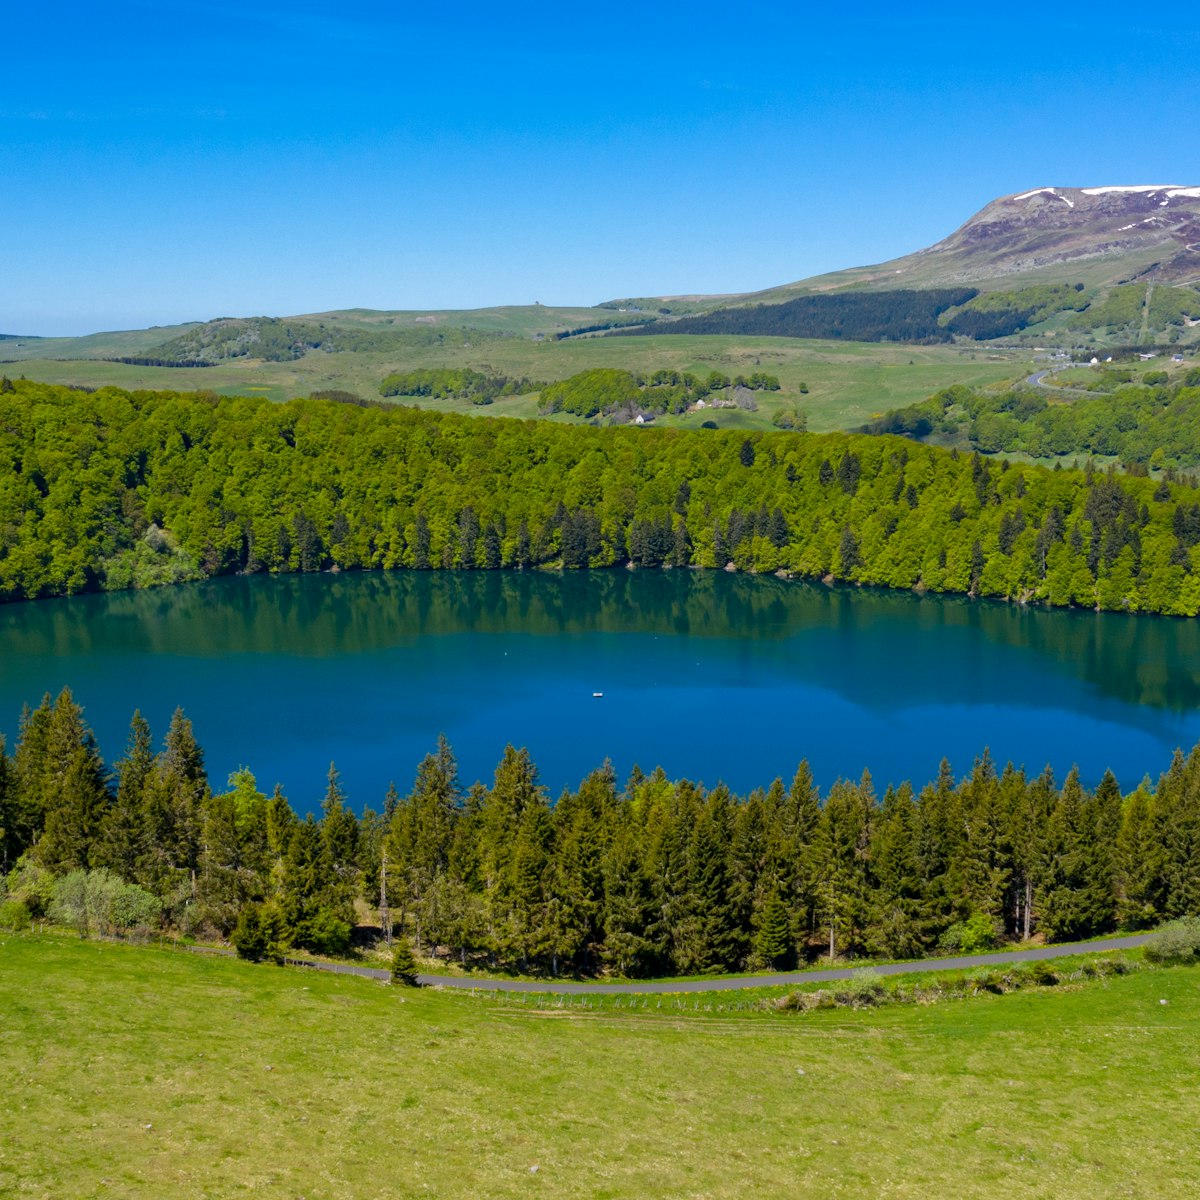 Lac Pavin and forest.